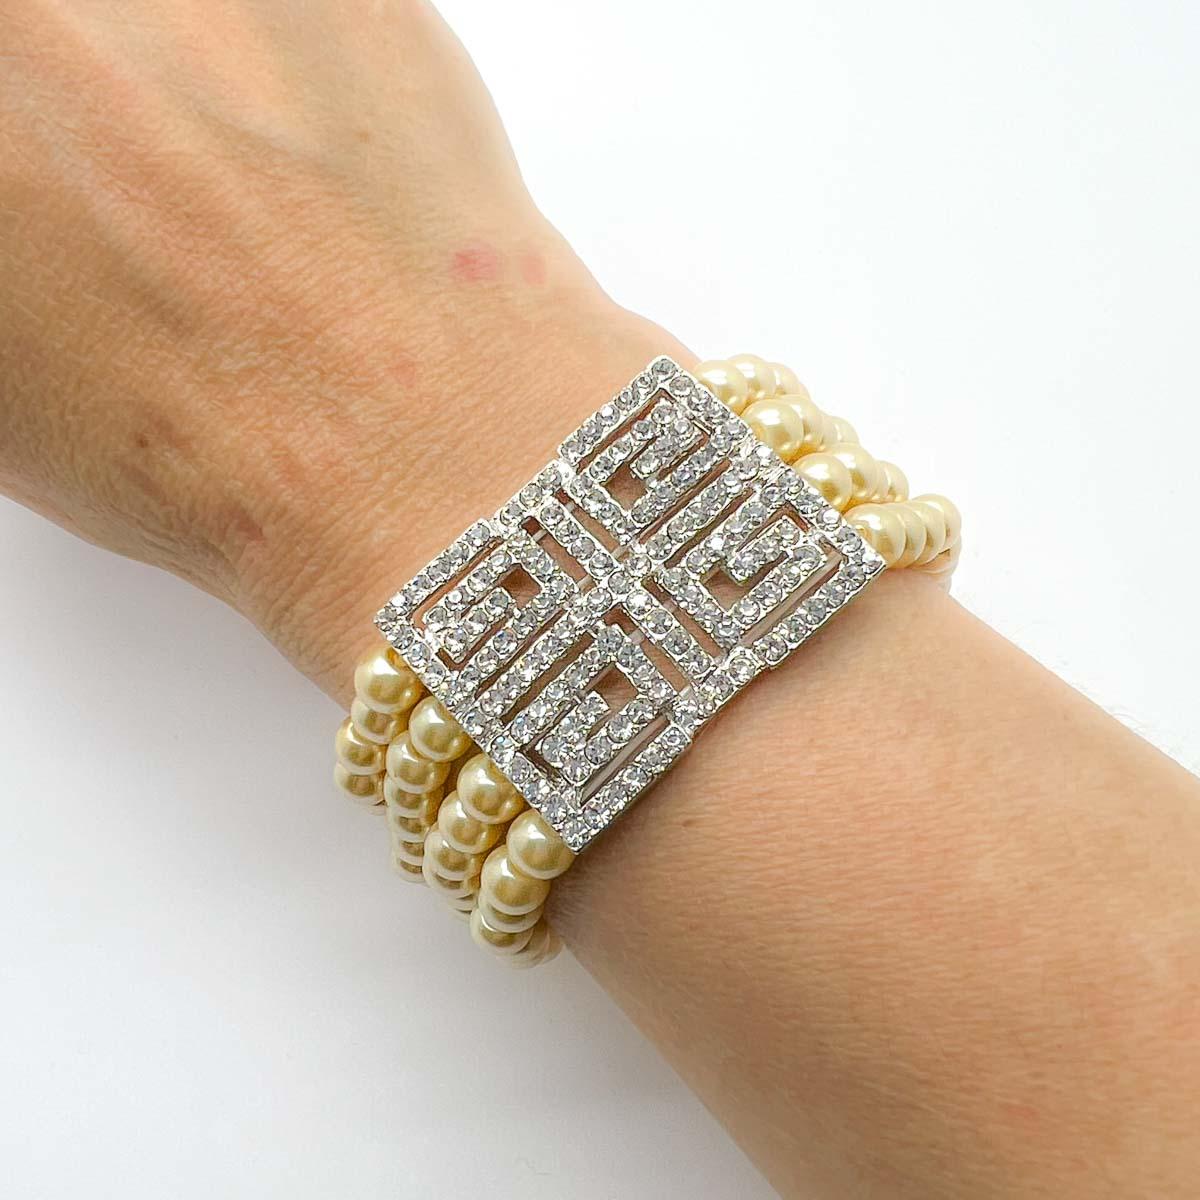 A Deco Inspired Pearl Bracelet. What could be better than rows of pearls around your wrist? Finishing the look with an art deco inspired crystal set panel of course. A timeless and utterly chic classic that will earn a place on your jewel hit list.